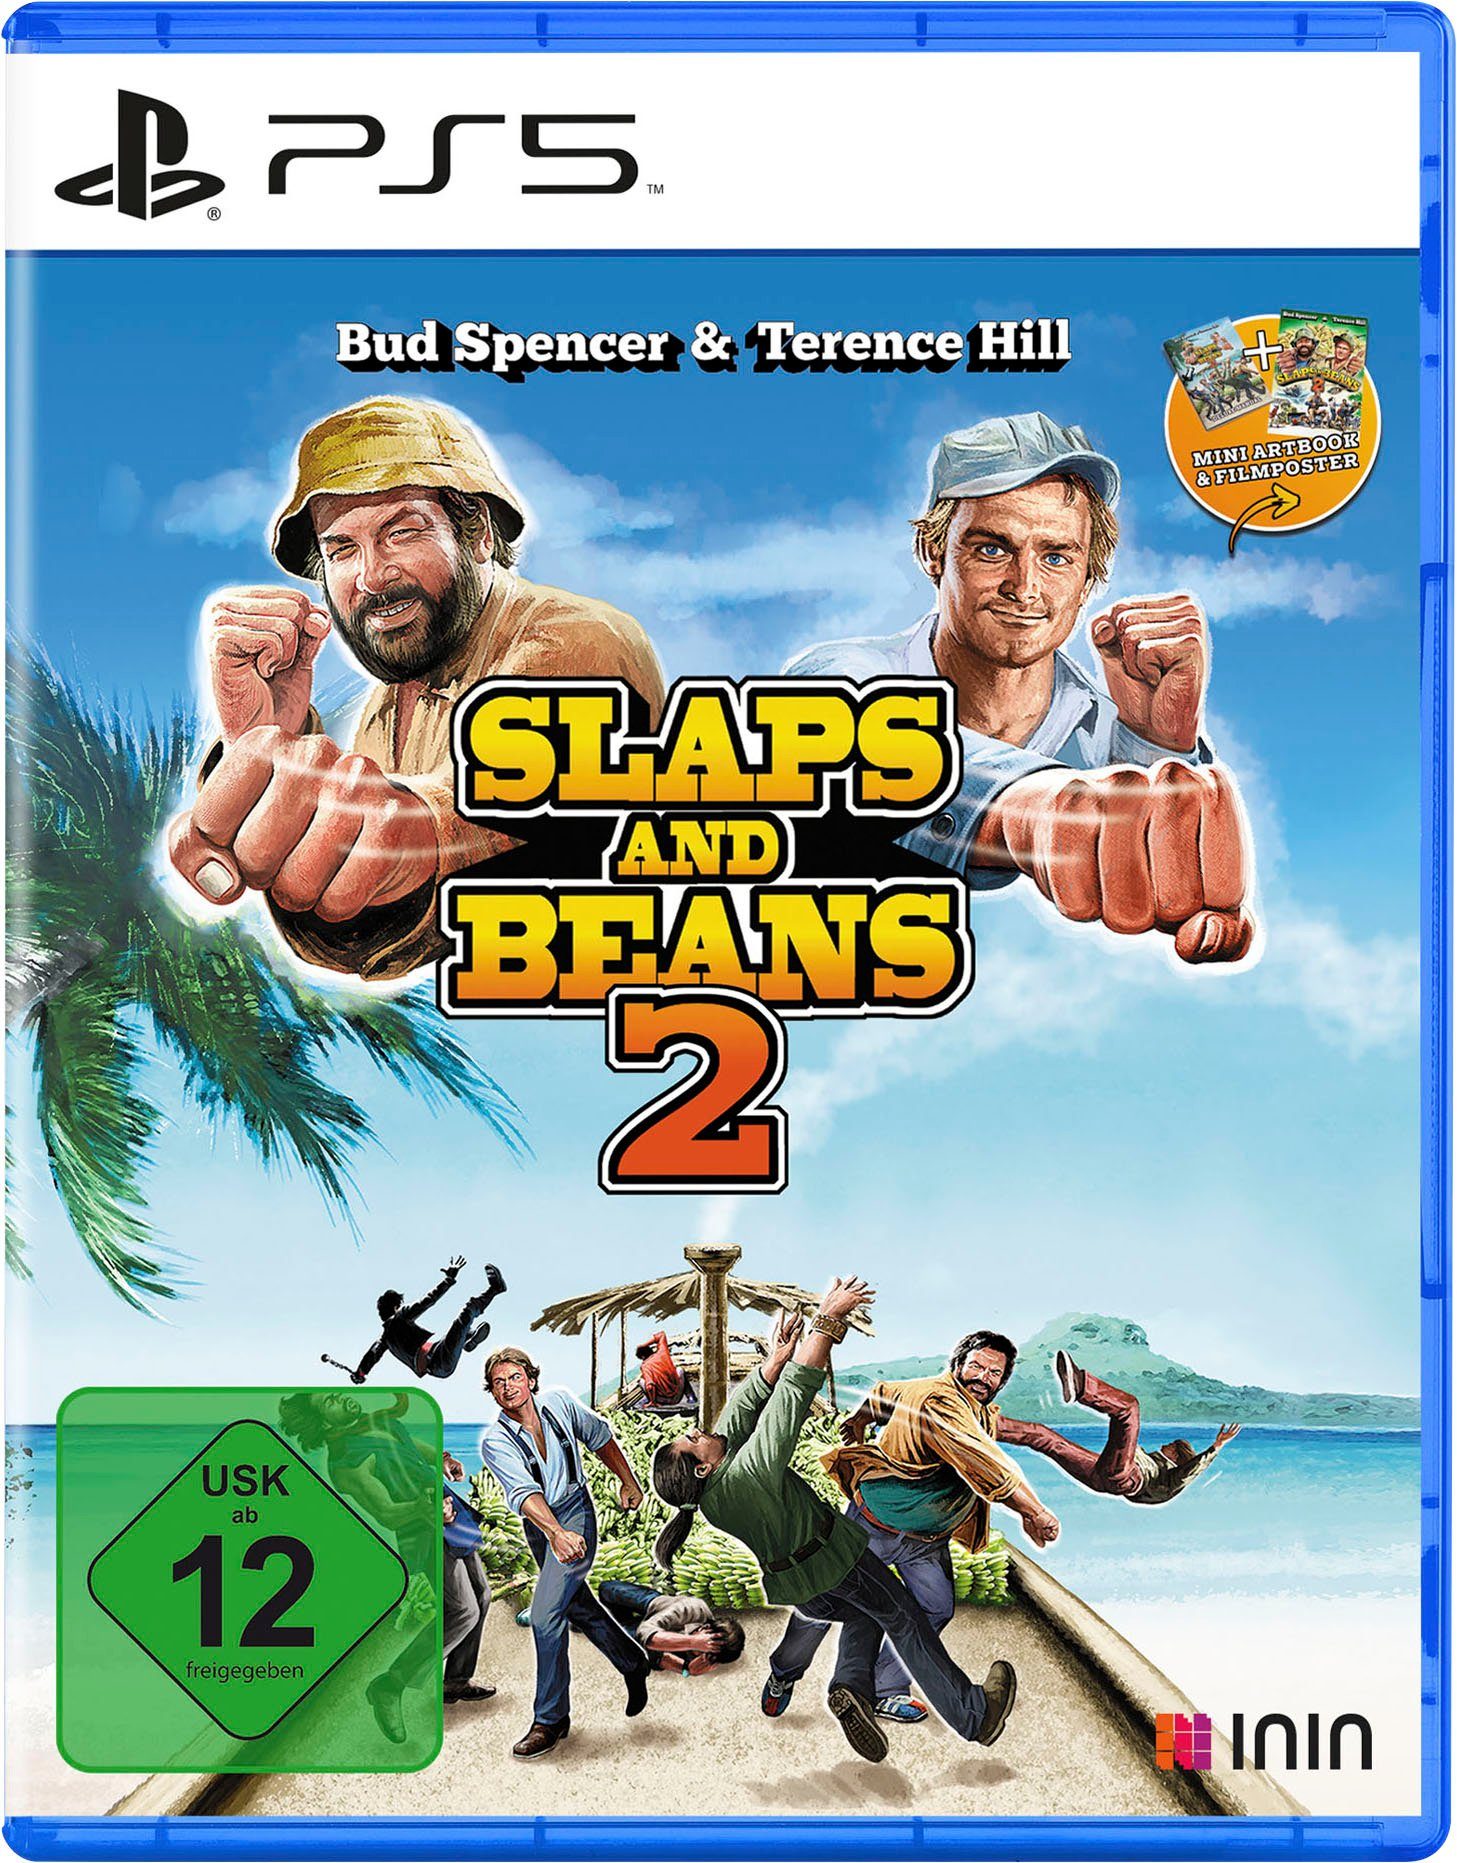 NBG Bud 2 Beans PlayStation Slaps Hill 5 And Spencer - & Terence